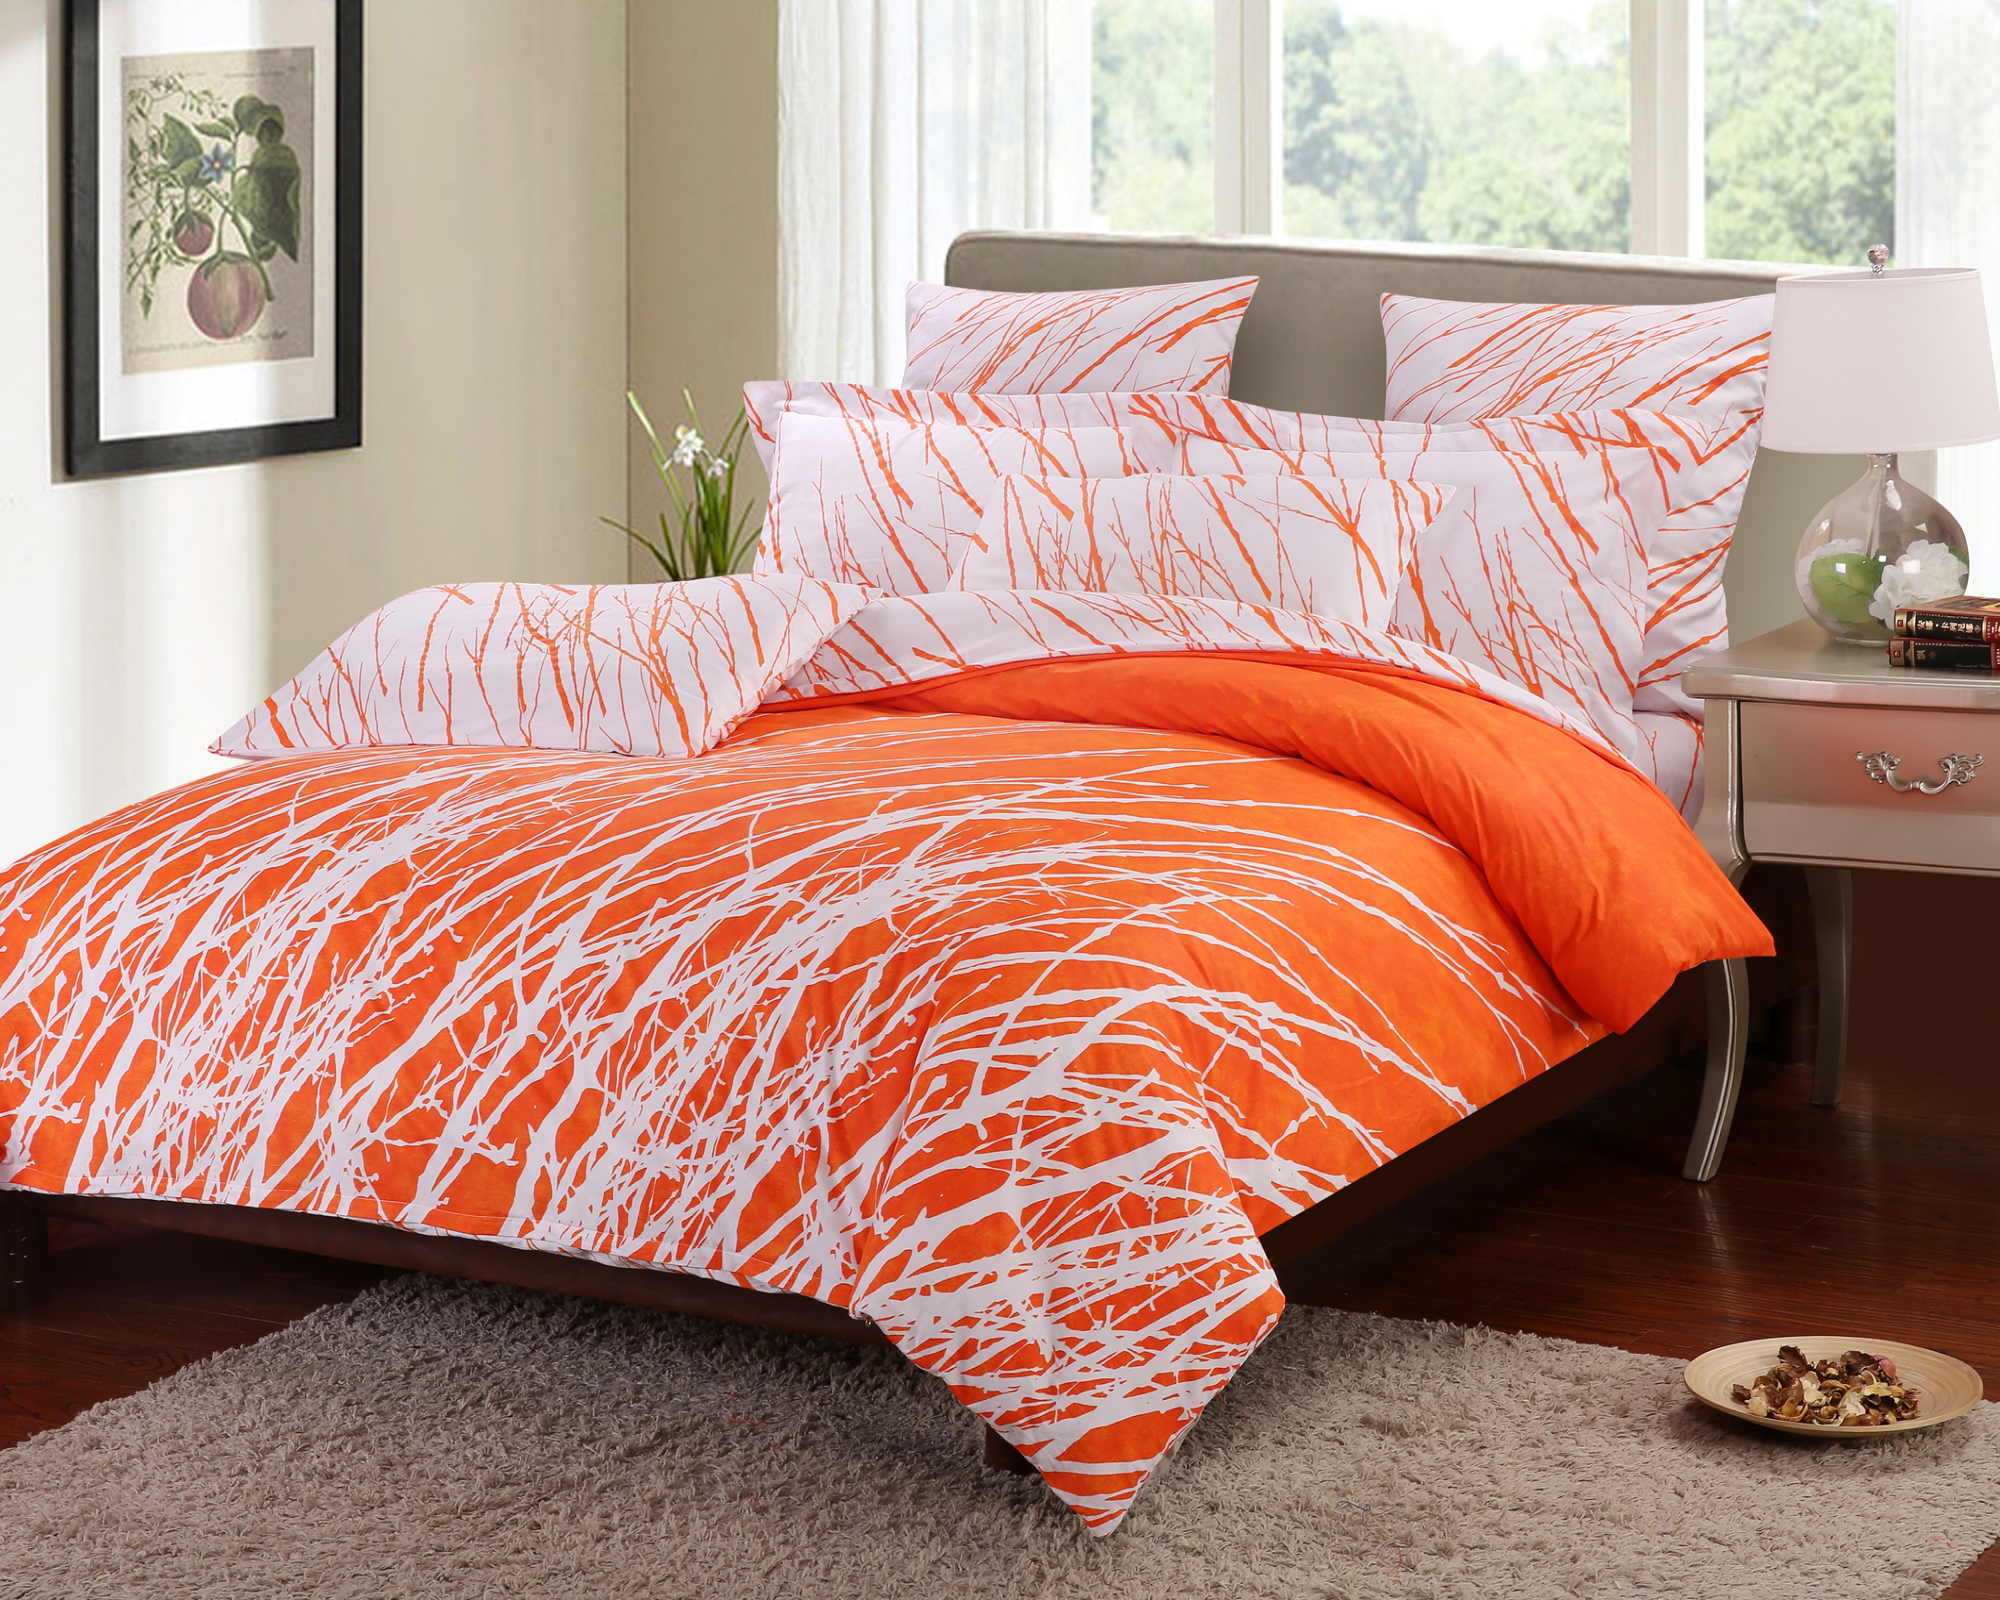 Tree Branches 100% Cotton Bedding Set: Duvet Cover and Pillow Shams